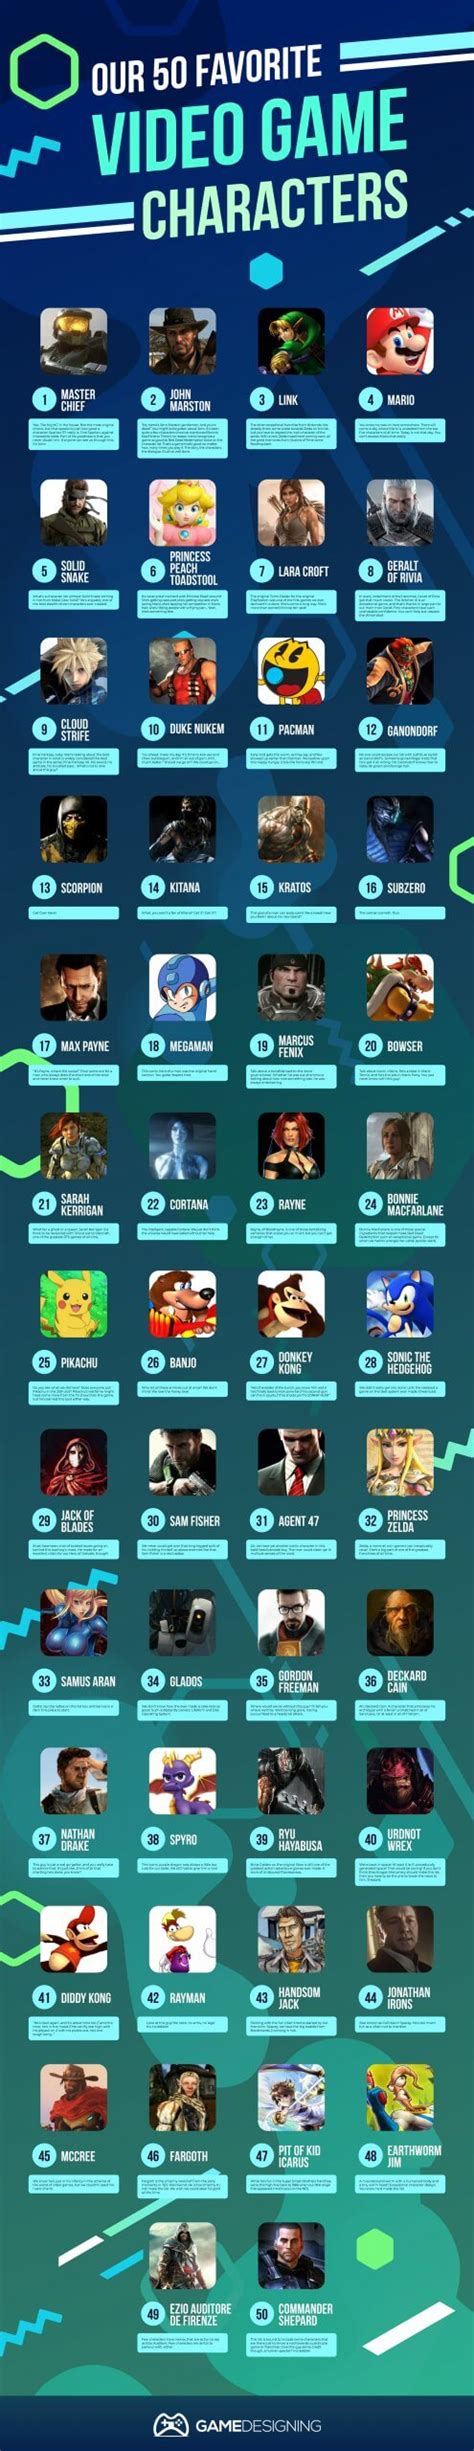 50 Most Iconic Video Game Characters Ever